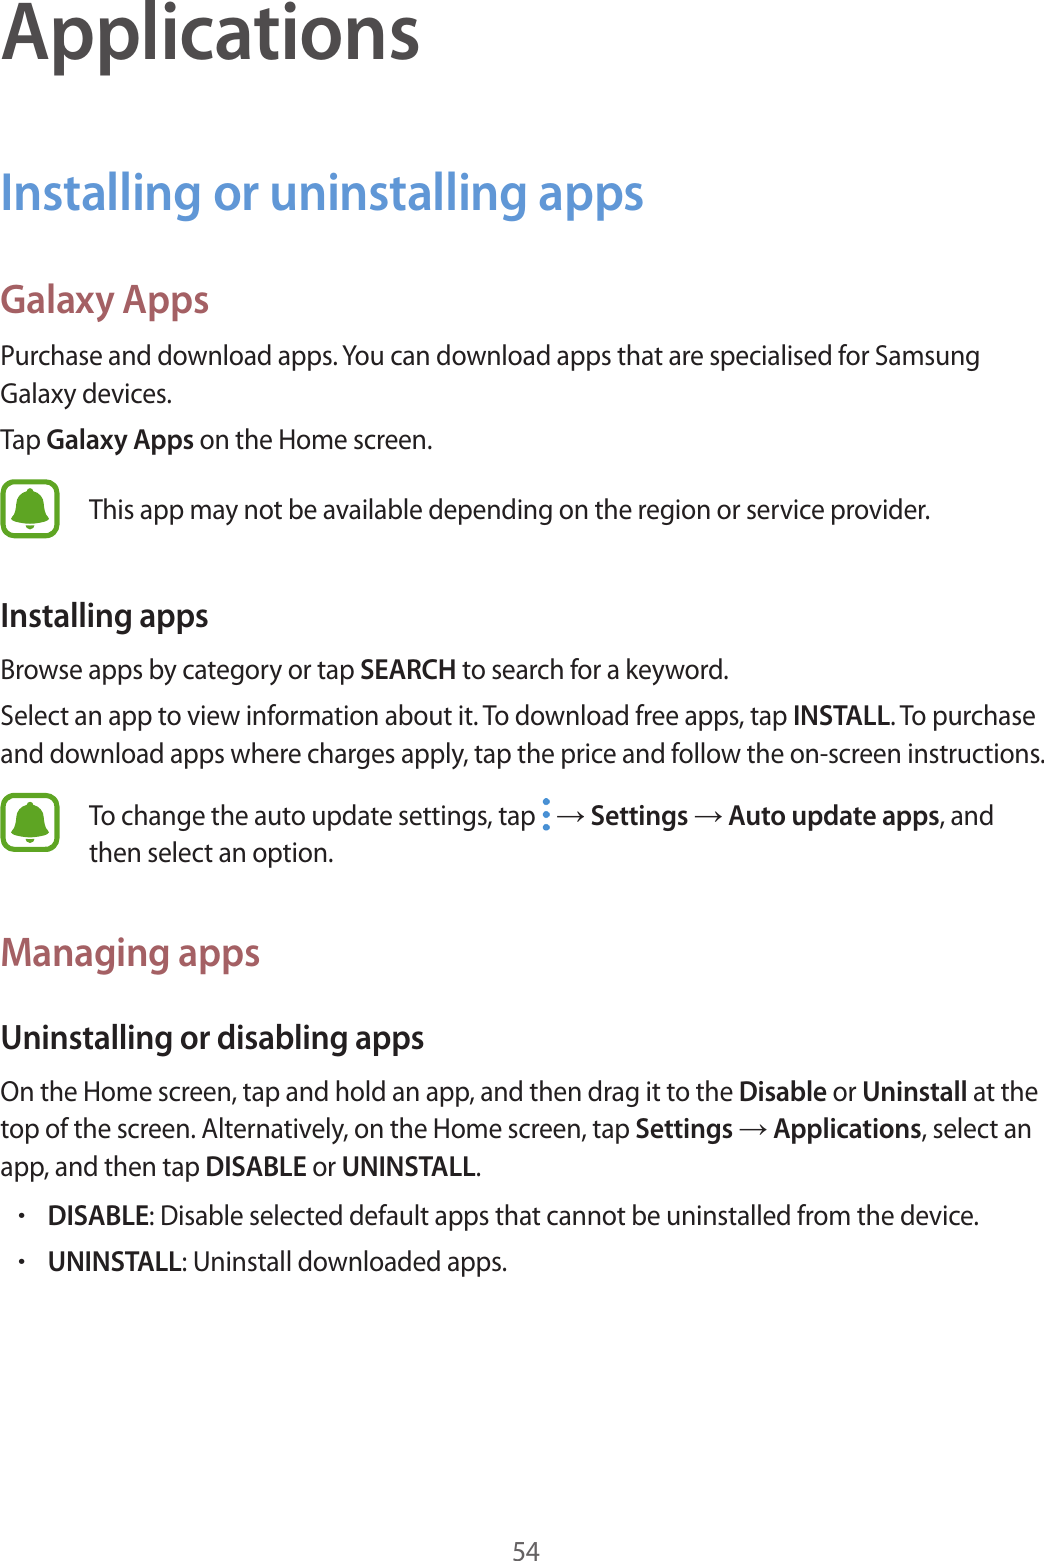 54ApplicationsInstalling or uninstalling appsGalaxy AppsPurchase and download apps. You can download apps that are specialised for Samsung Galaxy devices.Tap Galaxy Apps on the Home screen.This app may not be available depending on the region or service provider.Installing appsBrowse apps by category or tap SEARCH to search for a keyword.Select an app to view information about it. To download free apps, tap INSTALL. To purchase and download apps where charges apply, tap the price and follow the on-screen instructions.To change the auto update settings, tap   → Settings → Auto update apps, and then select an option.Managing appsUninstalling or disabling appsOn the Home screen, tap and hold an app, and then drag it to the Disable or Uninstall at the top of the screen. Alternatively, on the Home screen, tap Settings → Applications, select an app, and then tap DISABLE or UNINSTALL.•DISABLE: Disable selected default apps that cannot be uninstalled from the device.•UNINSTALL: Uninstall downloaded apps.